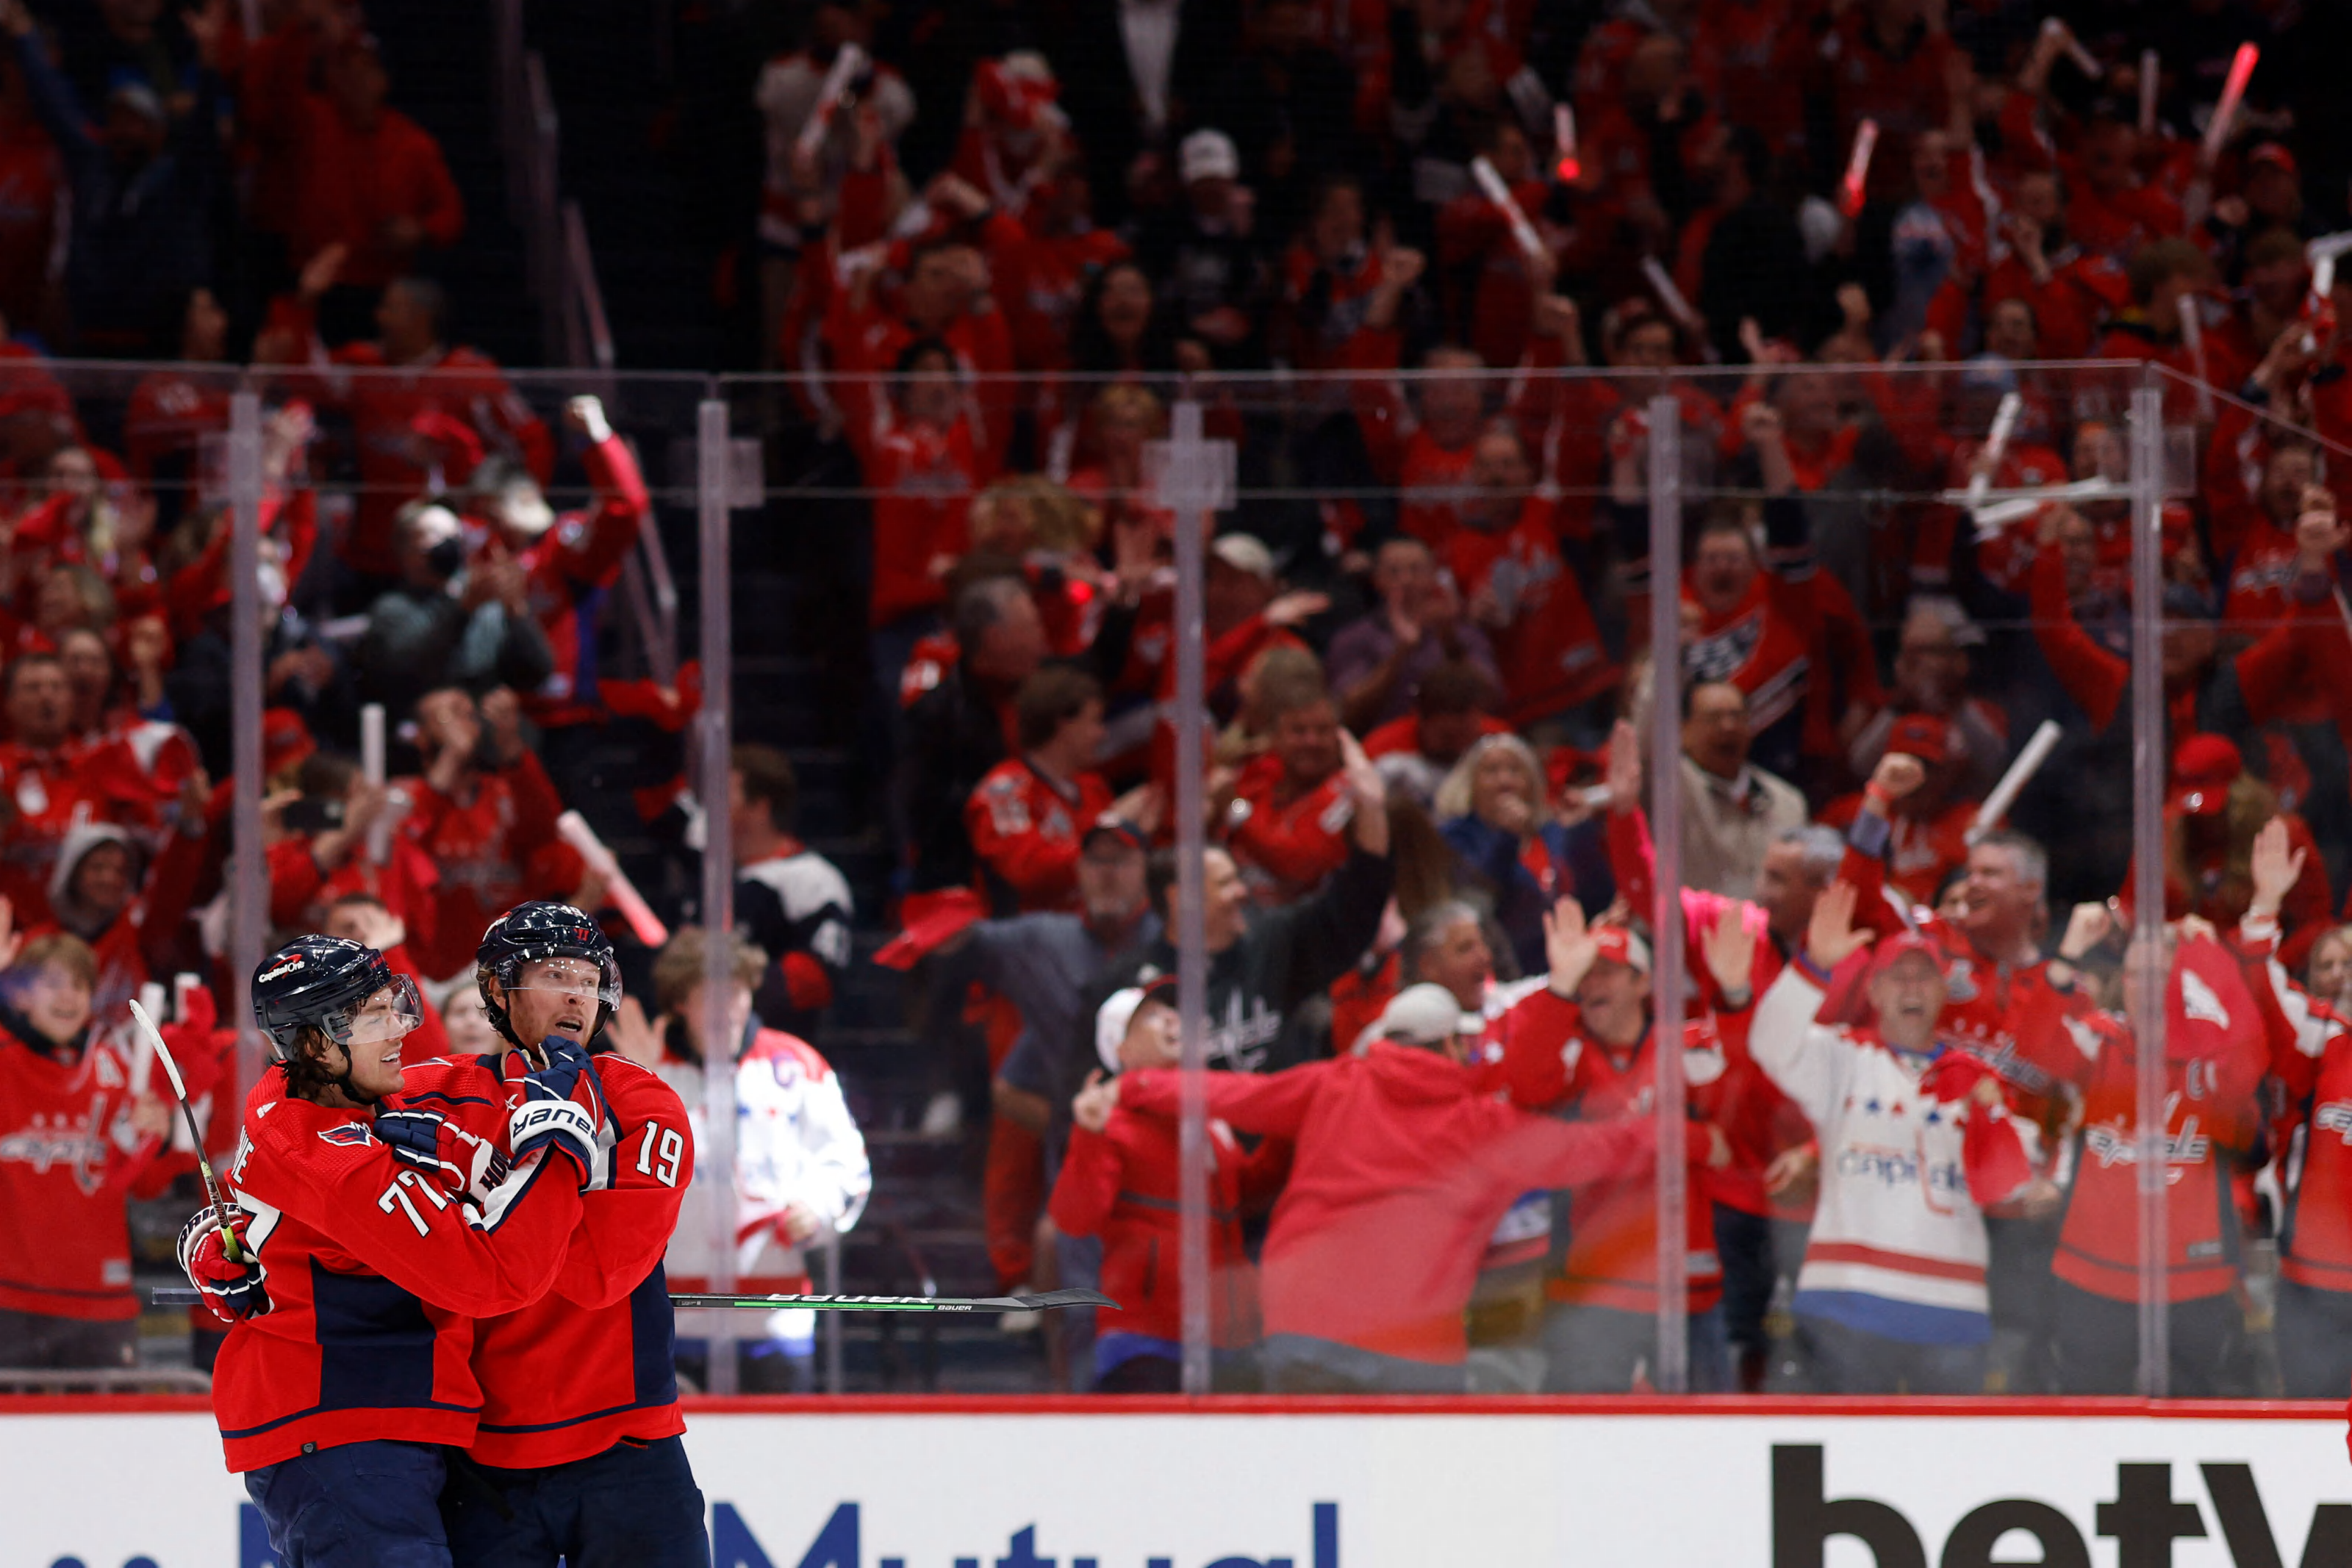 Capitals rout Panthers 6-1 in Game 3 to take 2-1 series lead